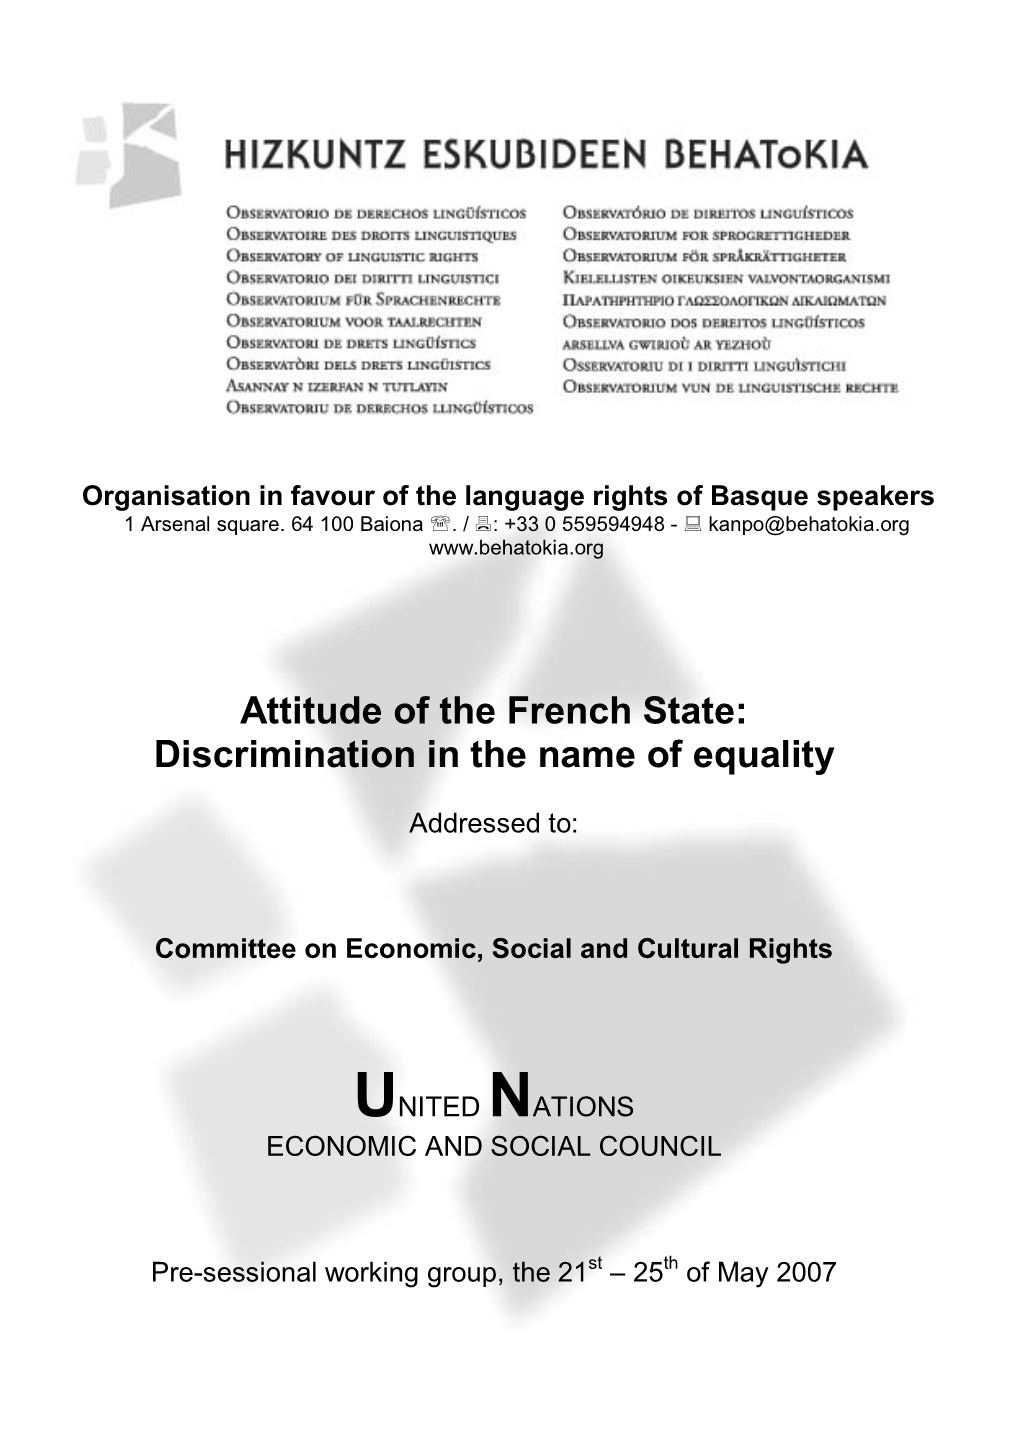 Attitude of the French State: Discrimination in the Name of Equality